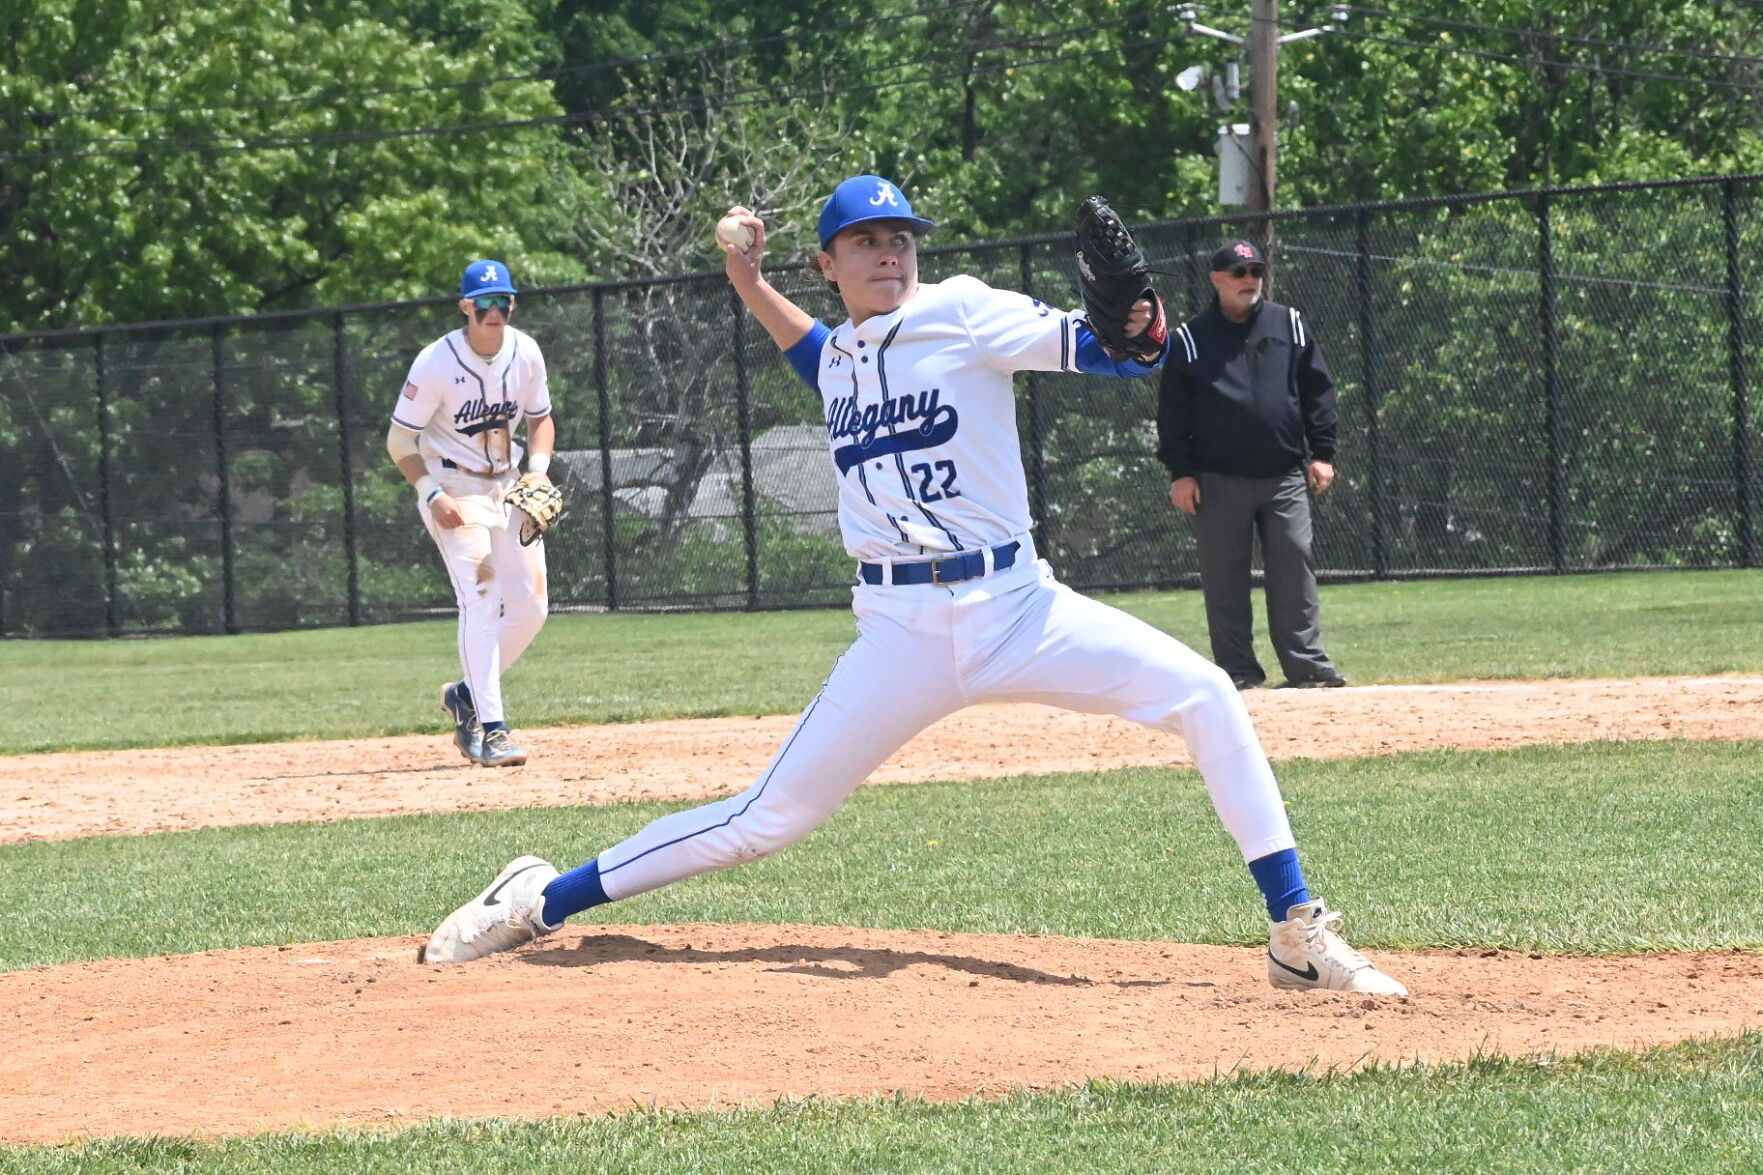 Allegany edges past Fort Hill 3-2 in extra-inning thriller; Sneathen seals win in 8th